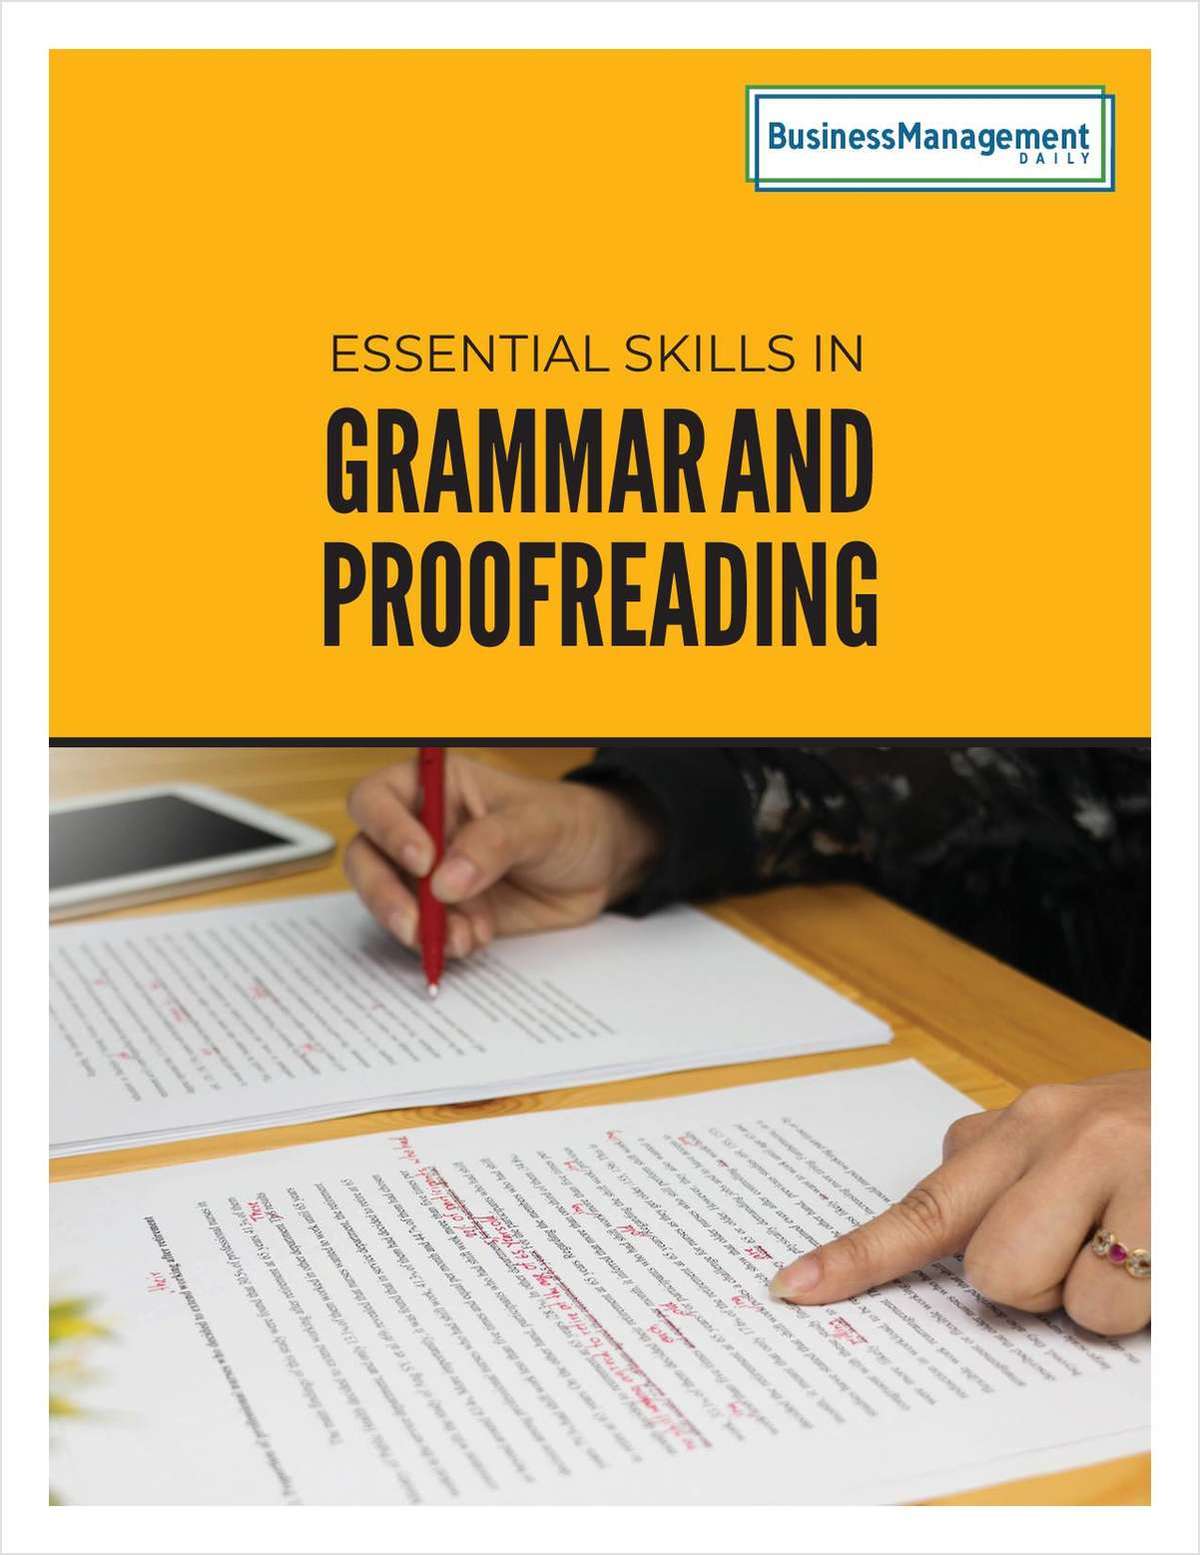 Essential Skills in Grammar and Proofreading